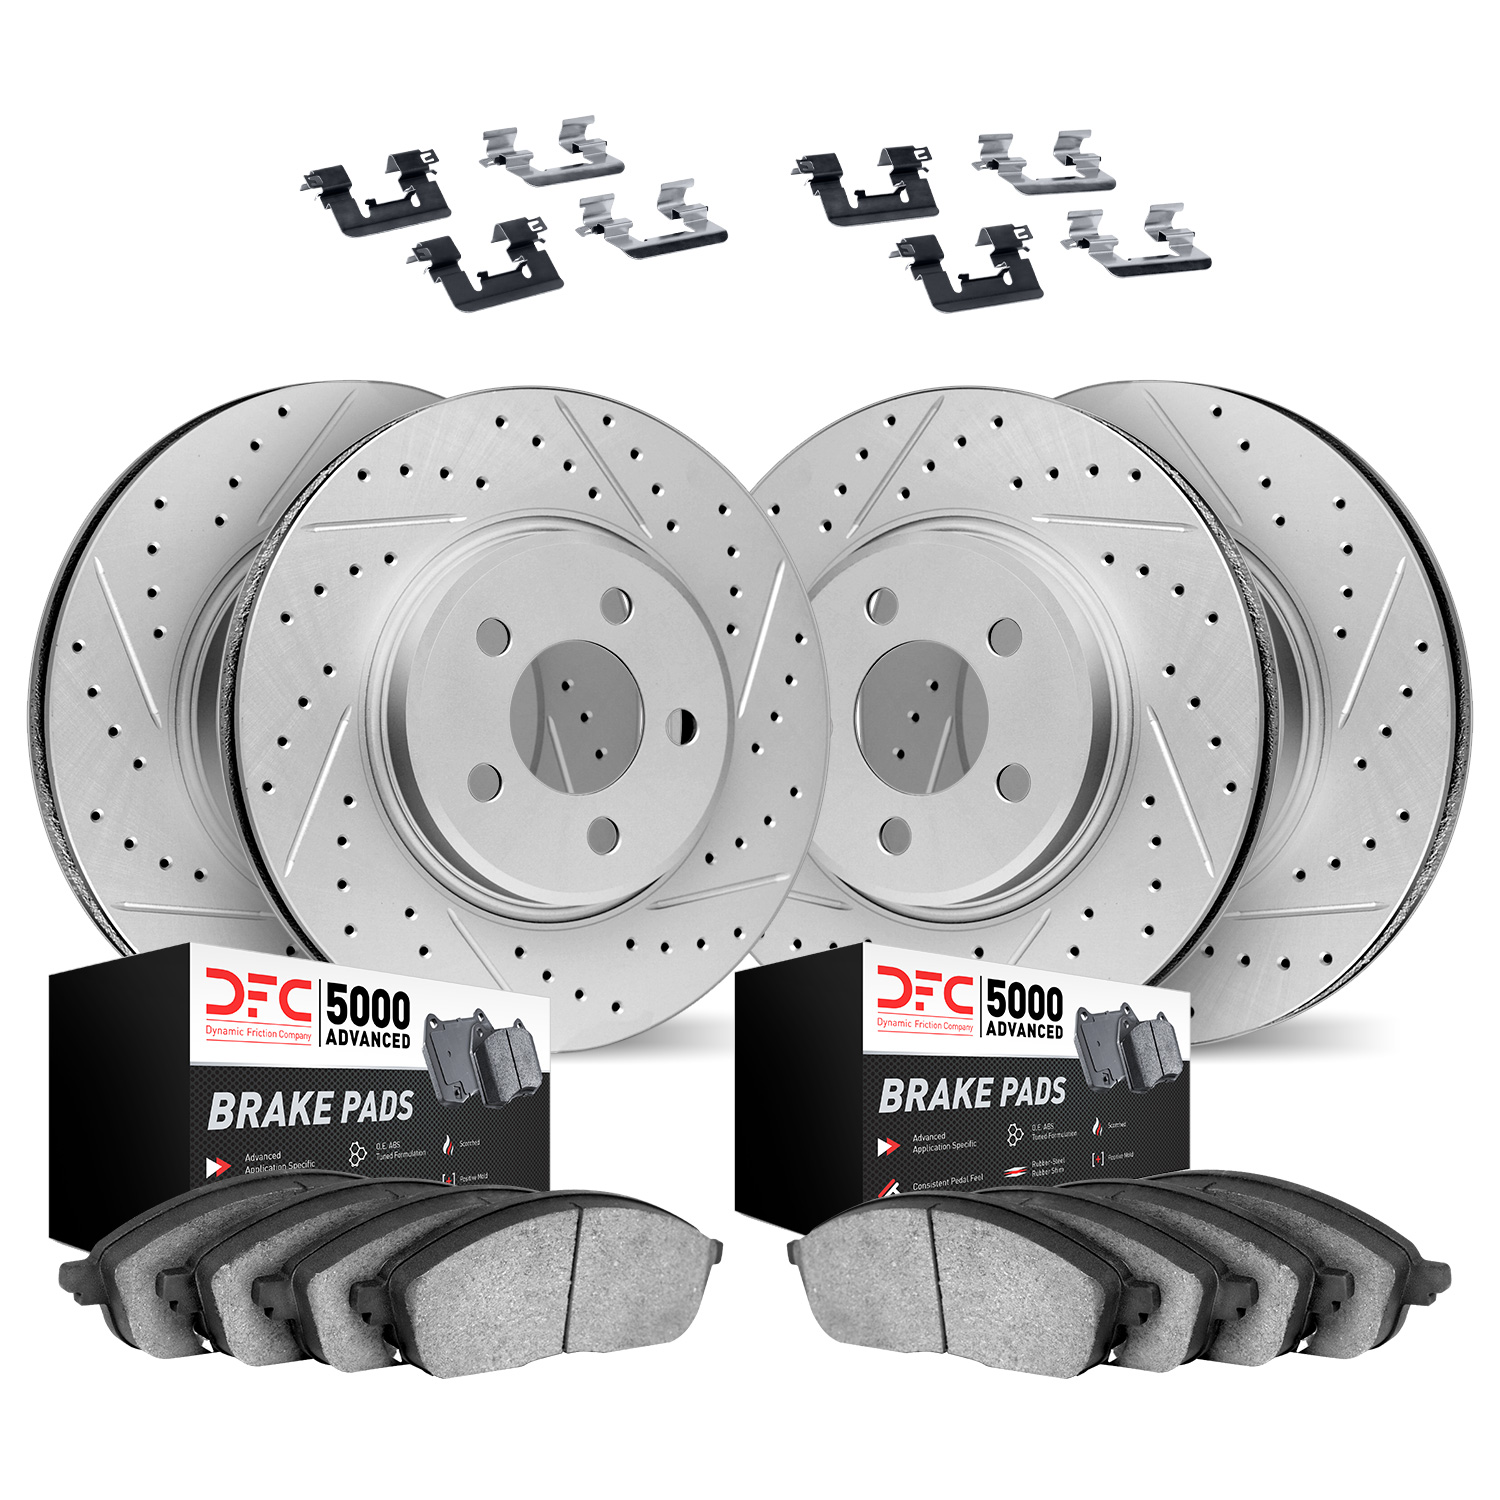 2514-27012 Geoperformance Drilled/Slotted Rotors w/5000 Advanced Brake Pads Kit & Hardware, 2016-2016 Volvo, Position: Front and